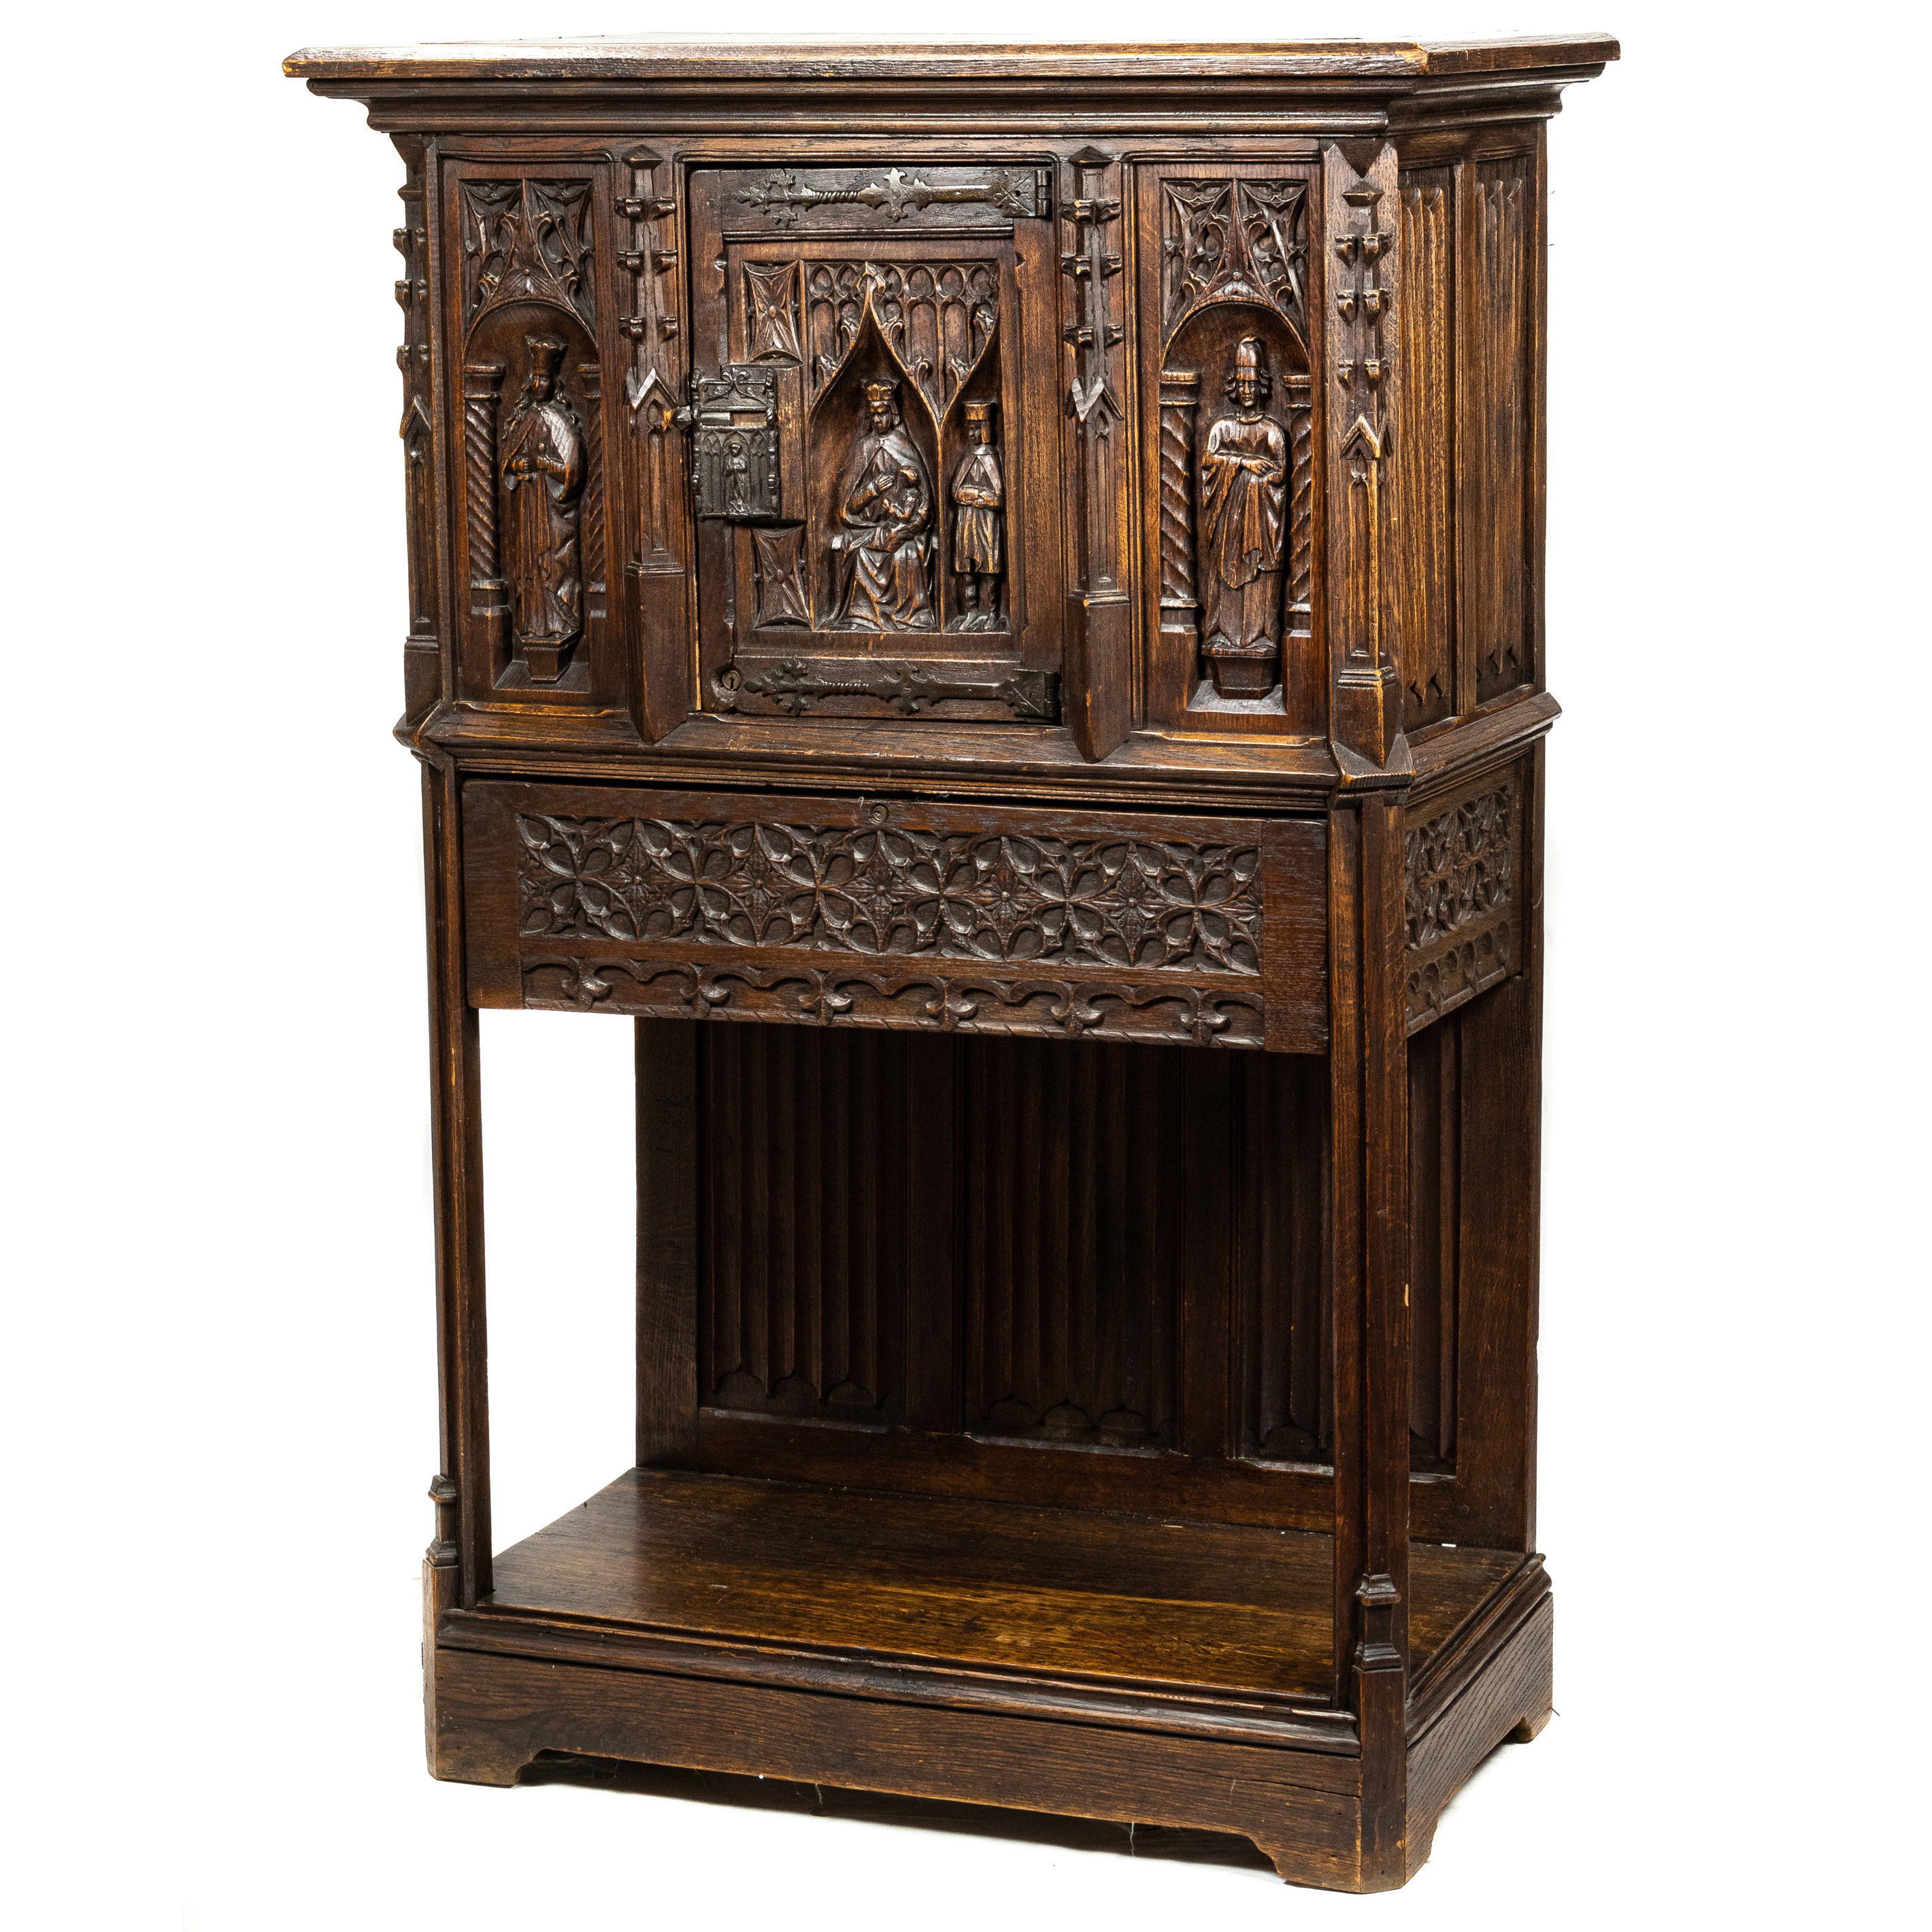 A FRENCH GOTHIC REVIVAL COURT CABINET